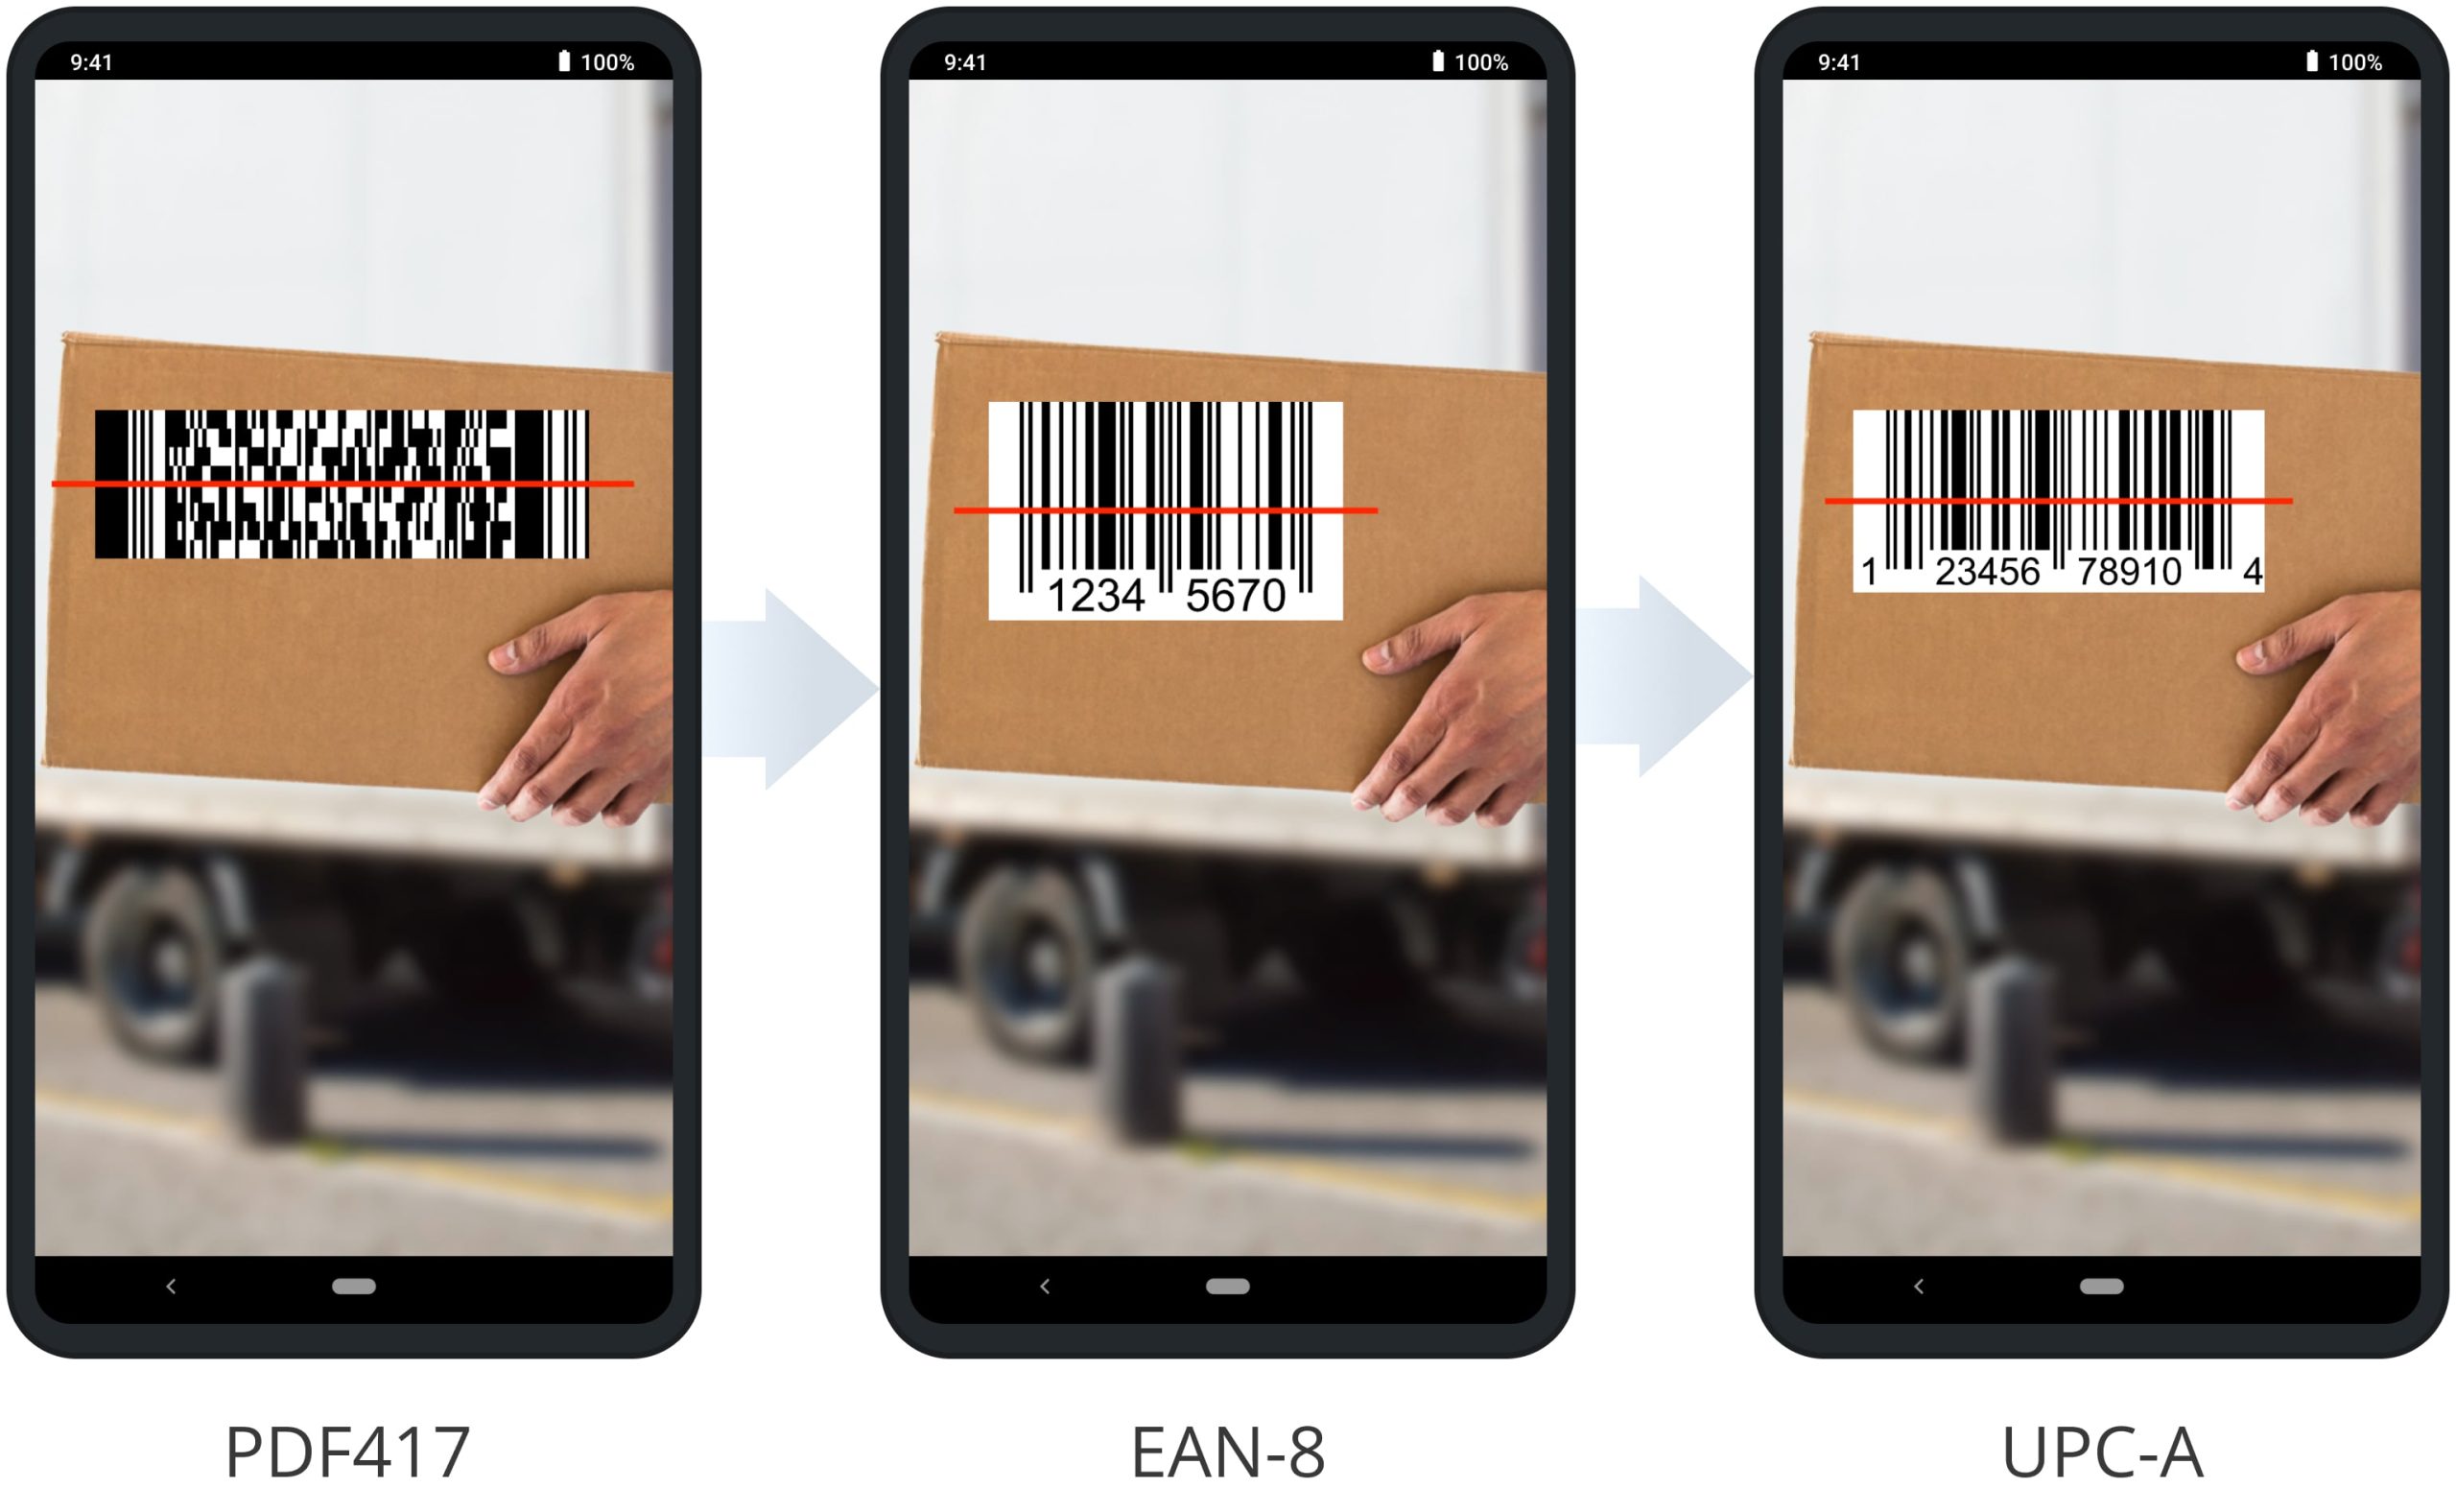 Scan PDF417, EAN-8, and UPC-A barcodes using Route4Me's Android Mobile Route Planner in-app barcode scanner.